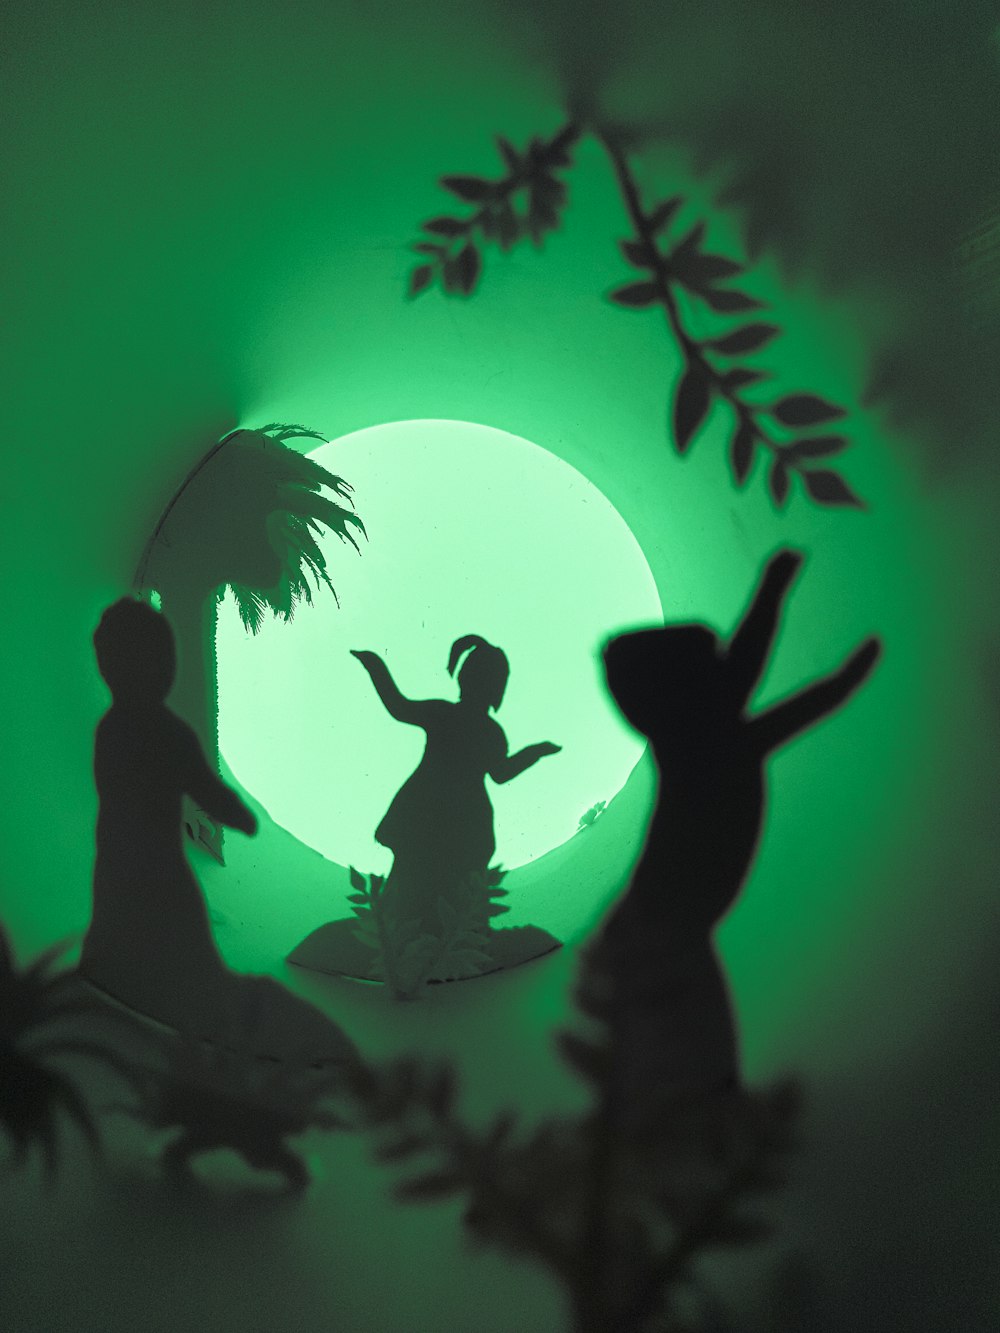 silhouettes of people dancing in front of a green light